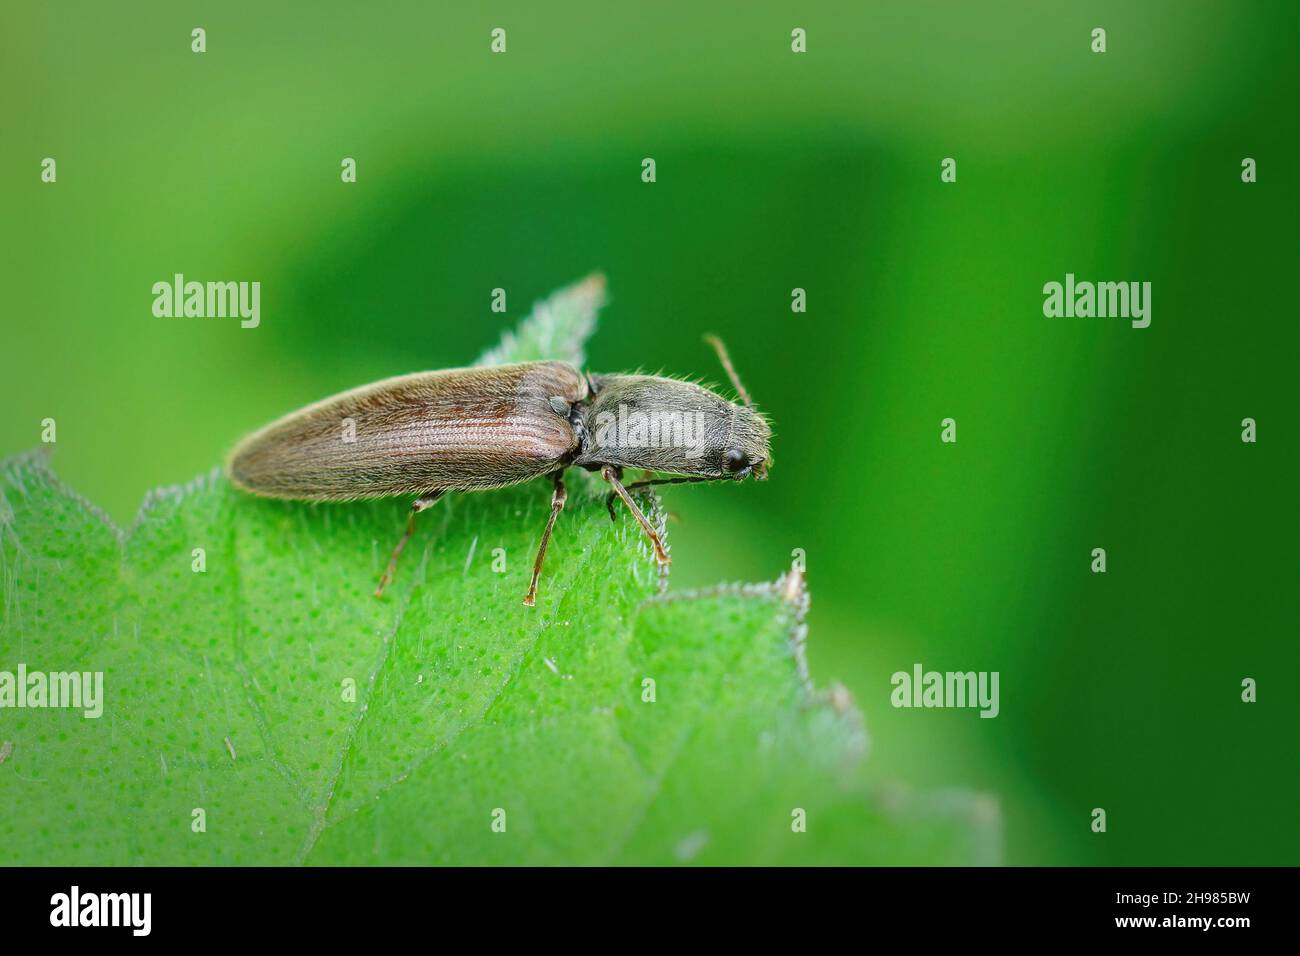 Closeup on a brown hairy clicking beetle, Athous haemorrhoidalis sitting on a green leaf in hte garden Stock Photo